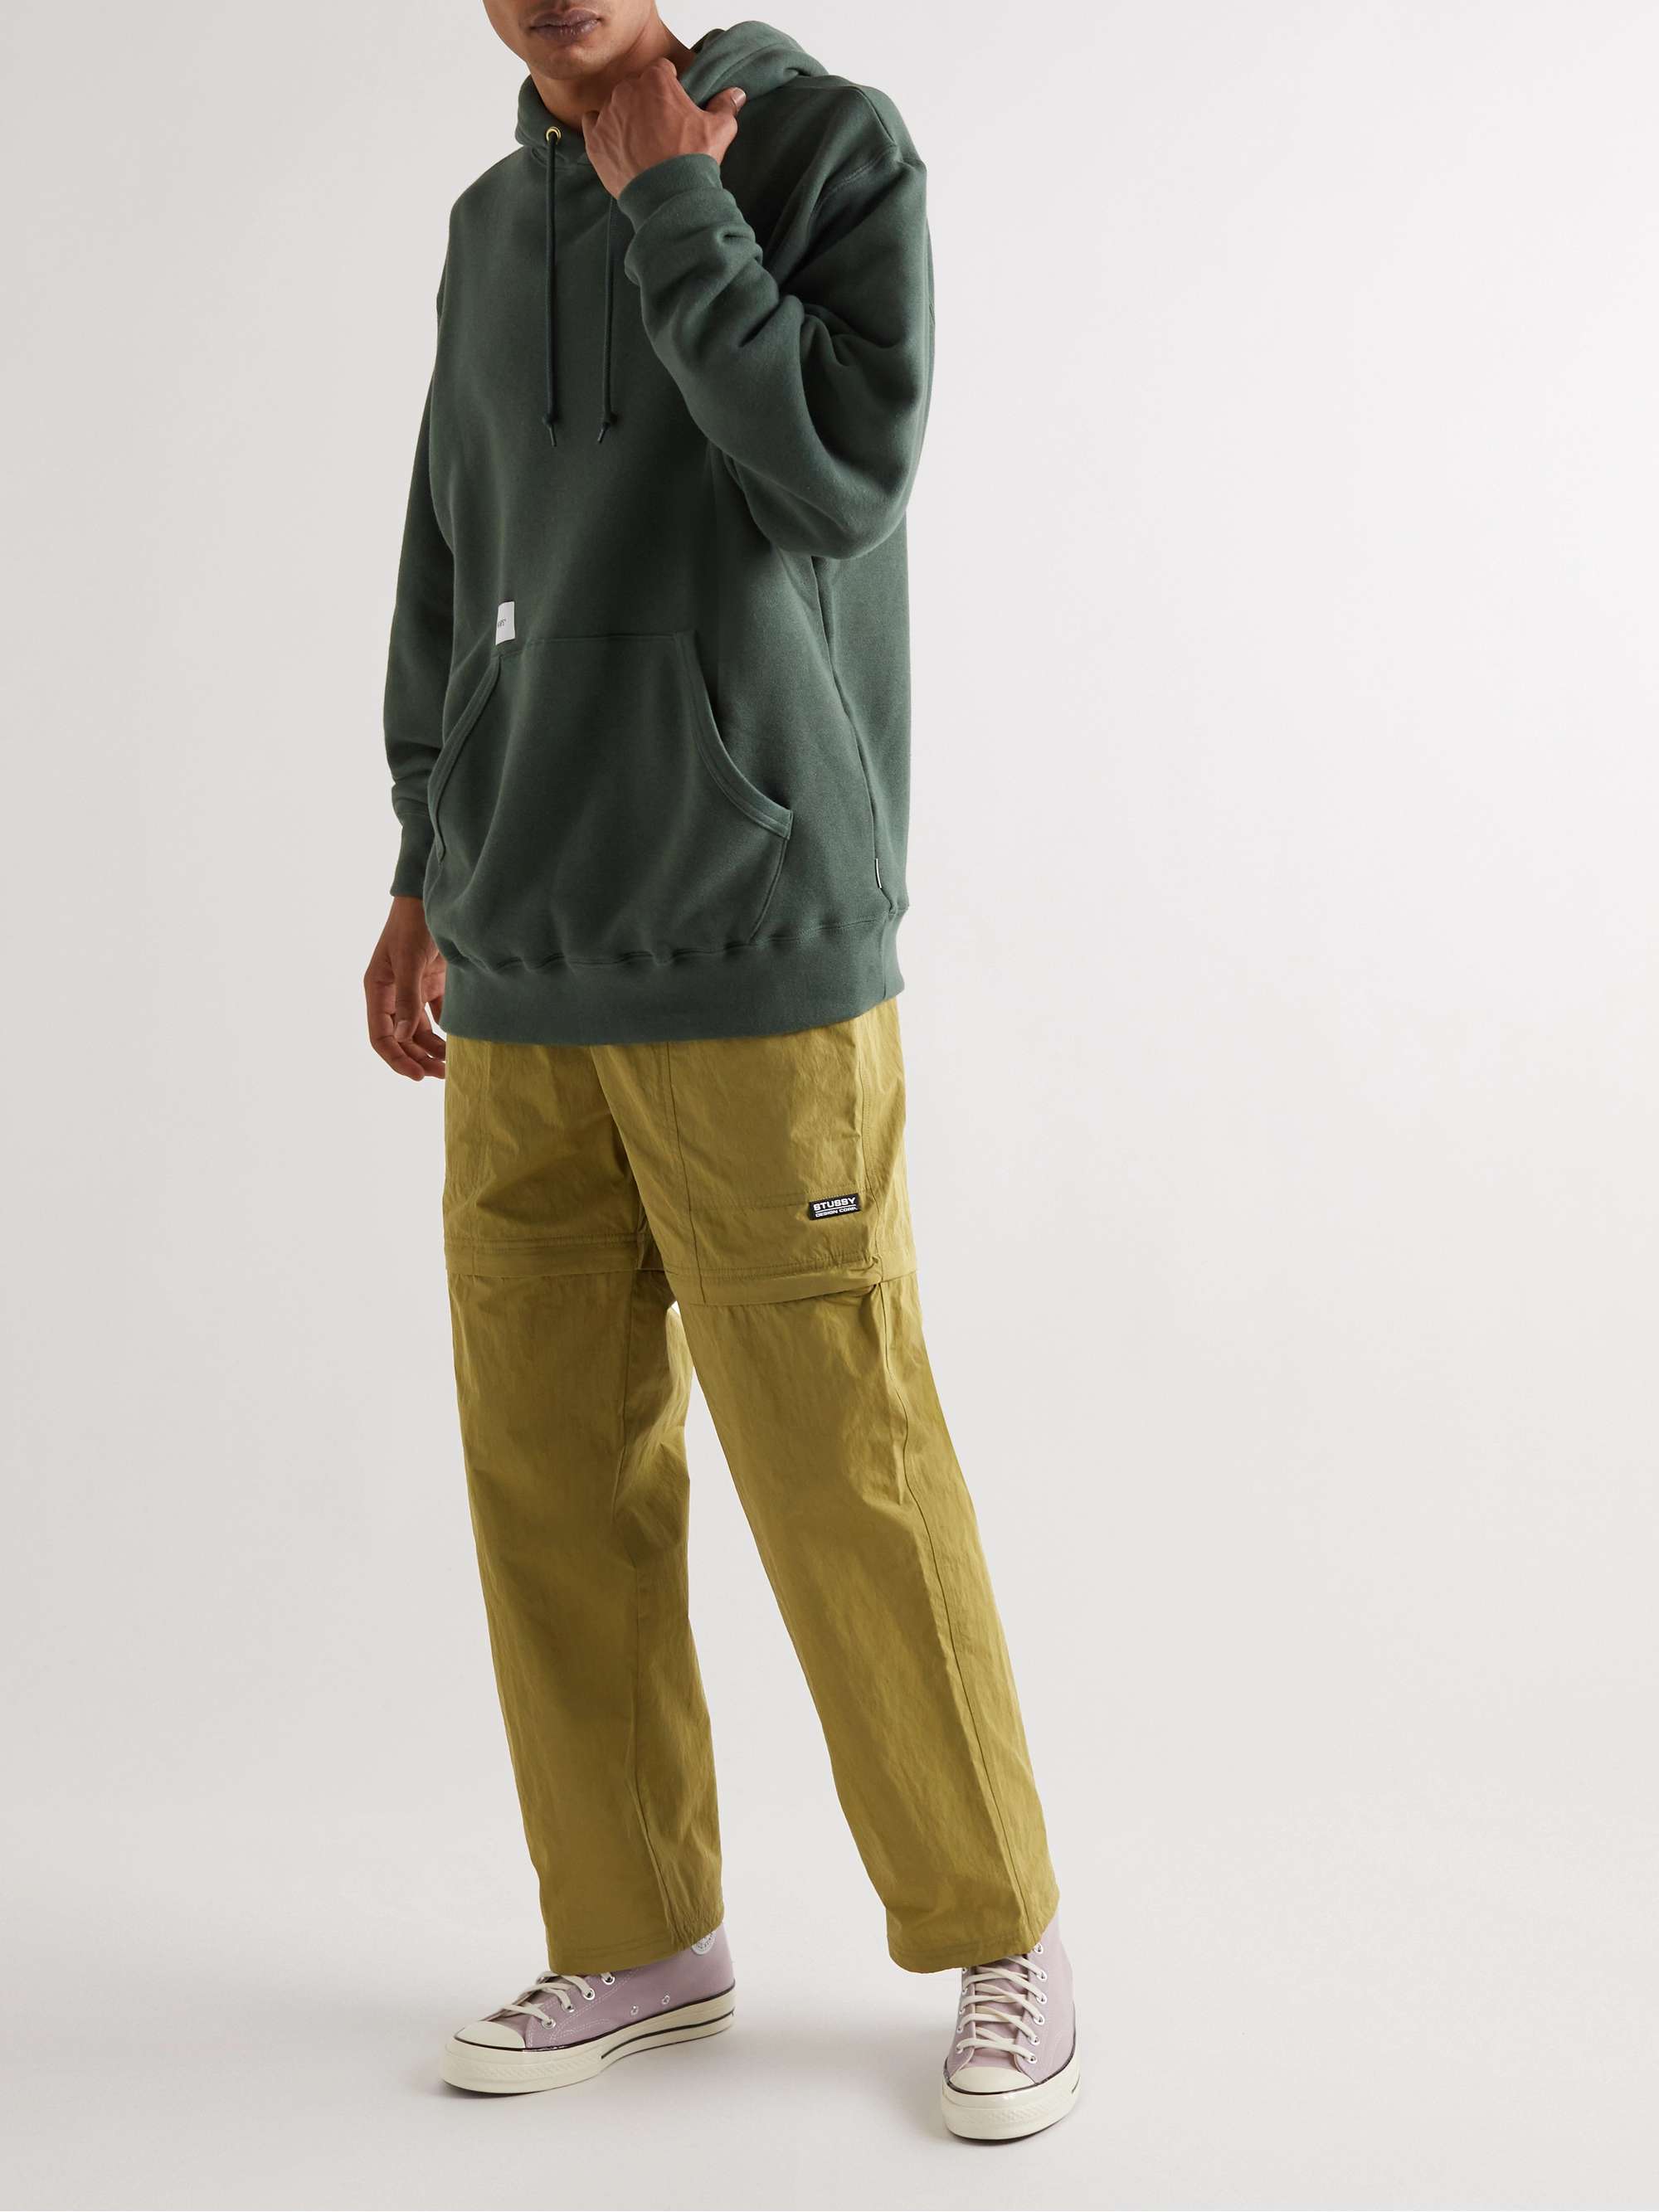 stussy 23ss NYCO PRINTED OVER TROUSERS | fmupac.org